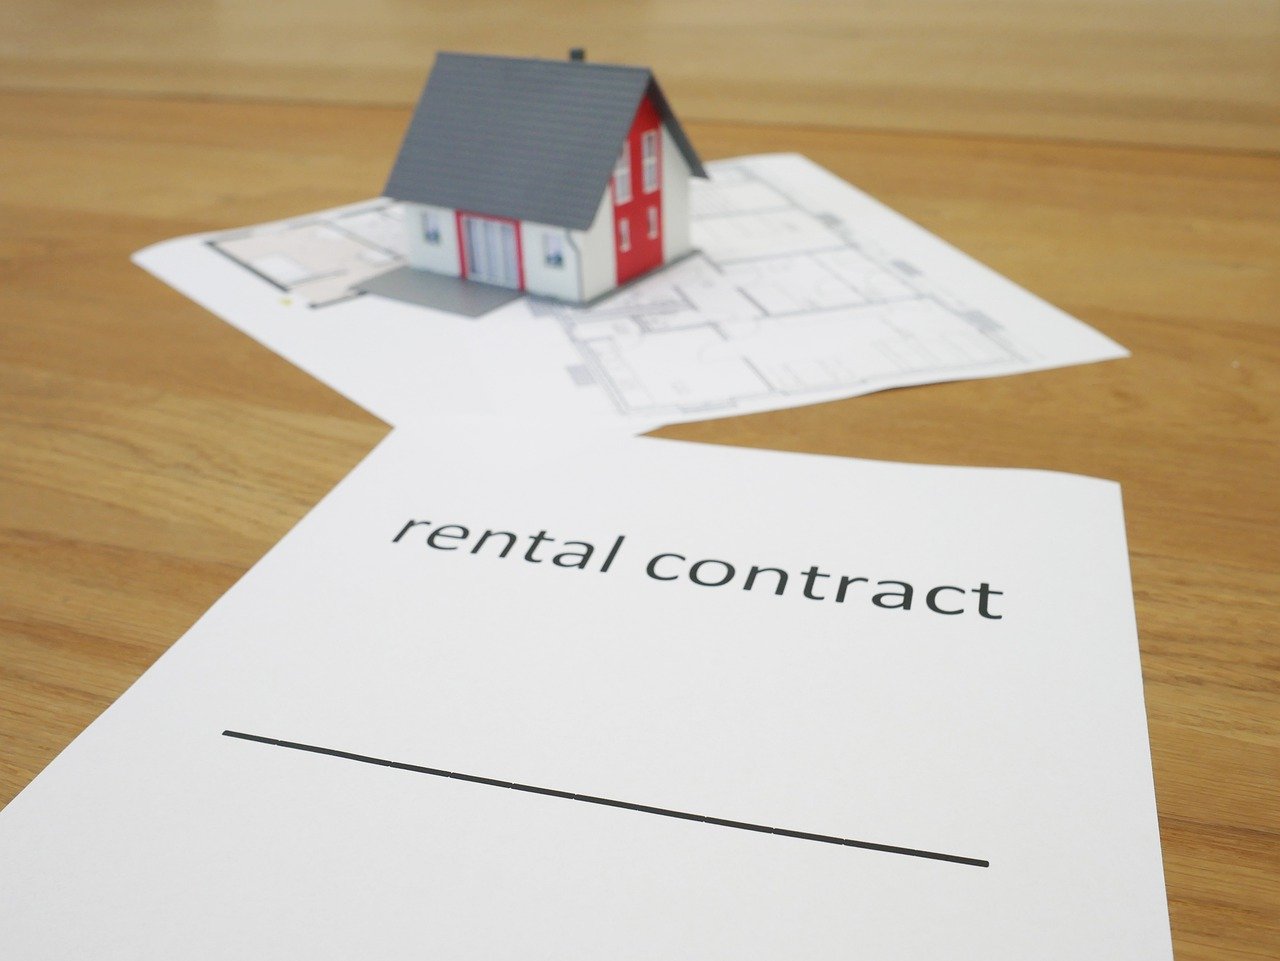 Rental contract form.